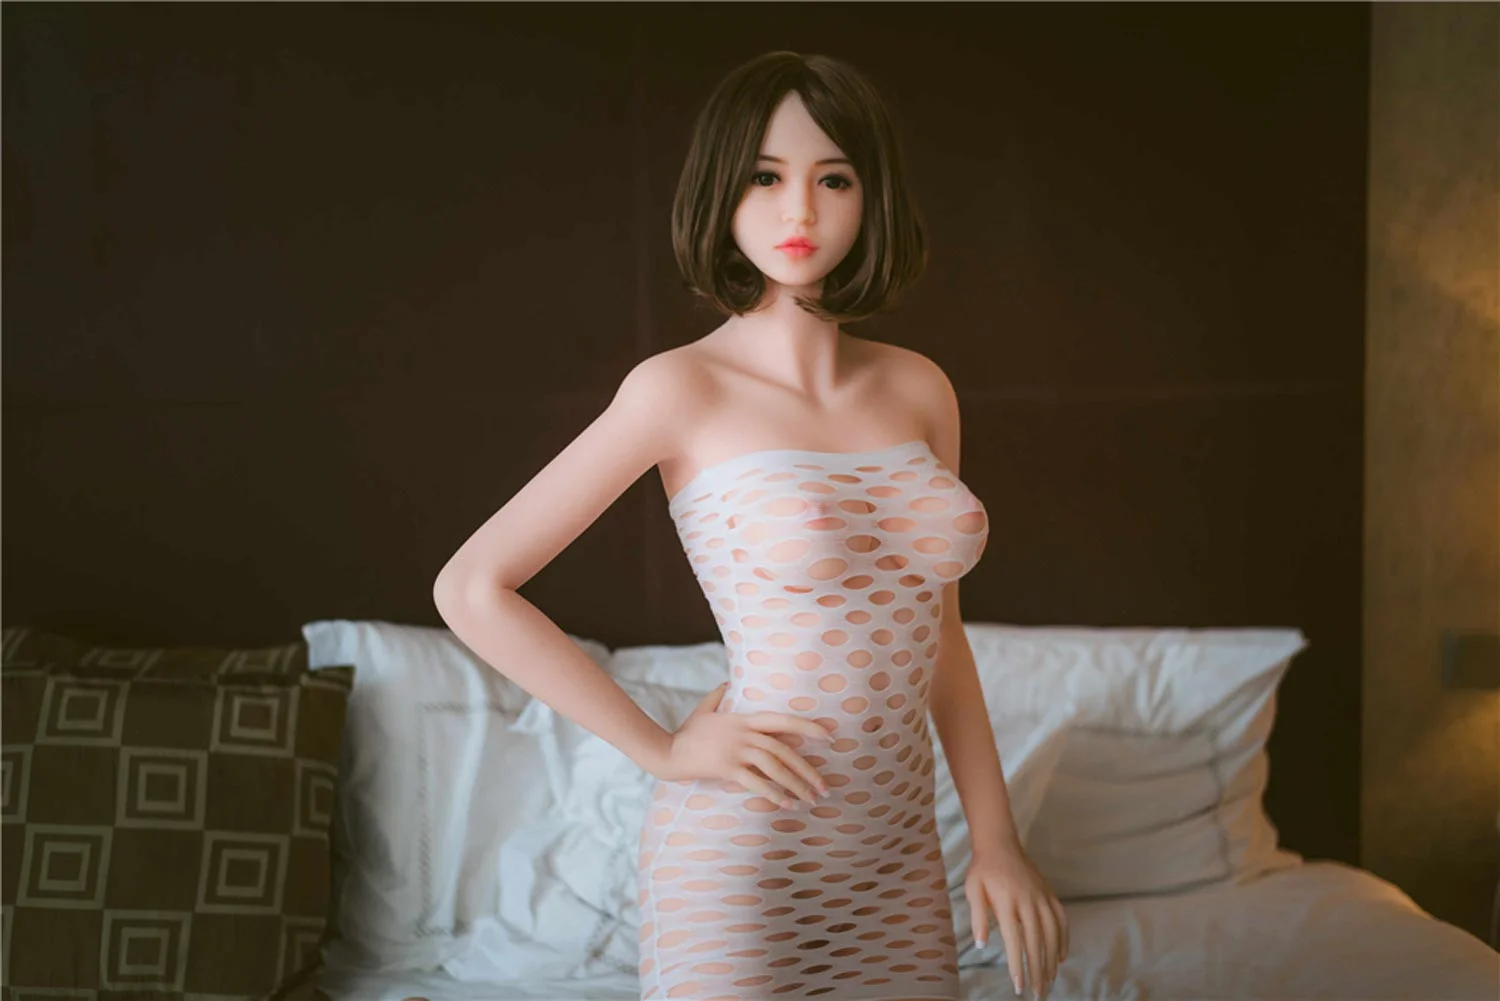 Sex doll with hands on hips